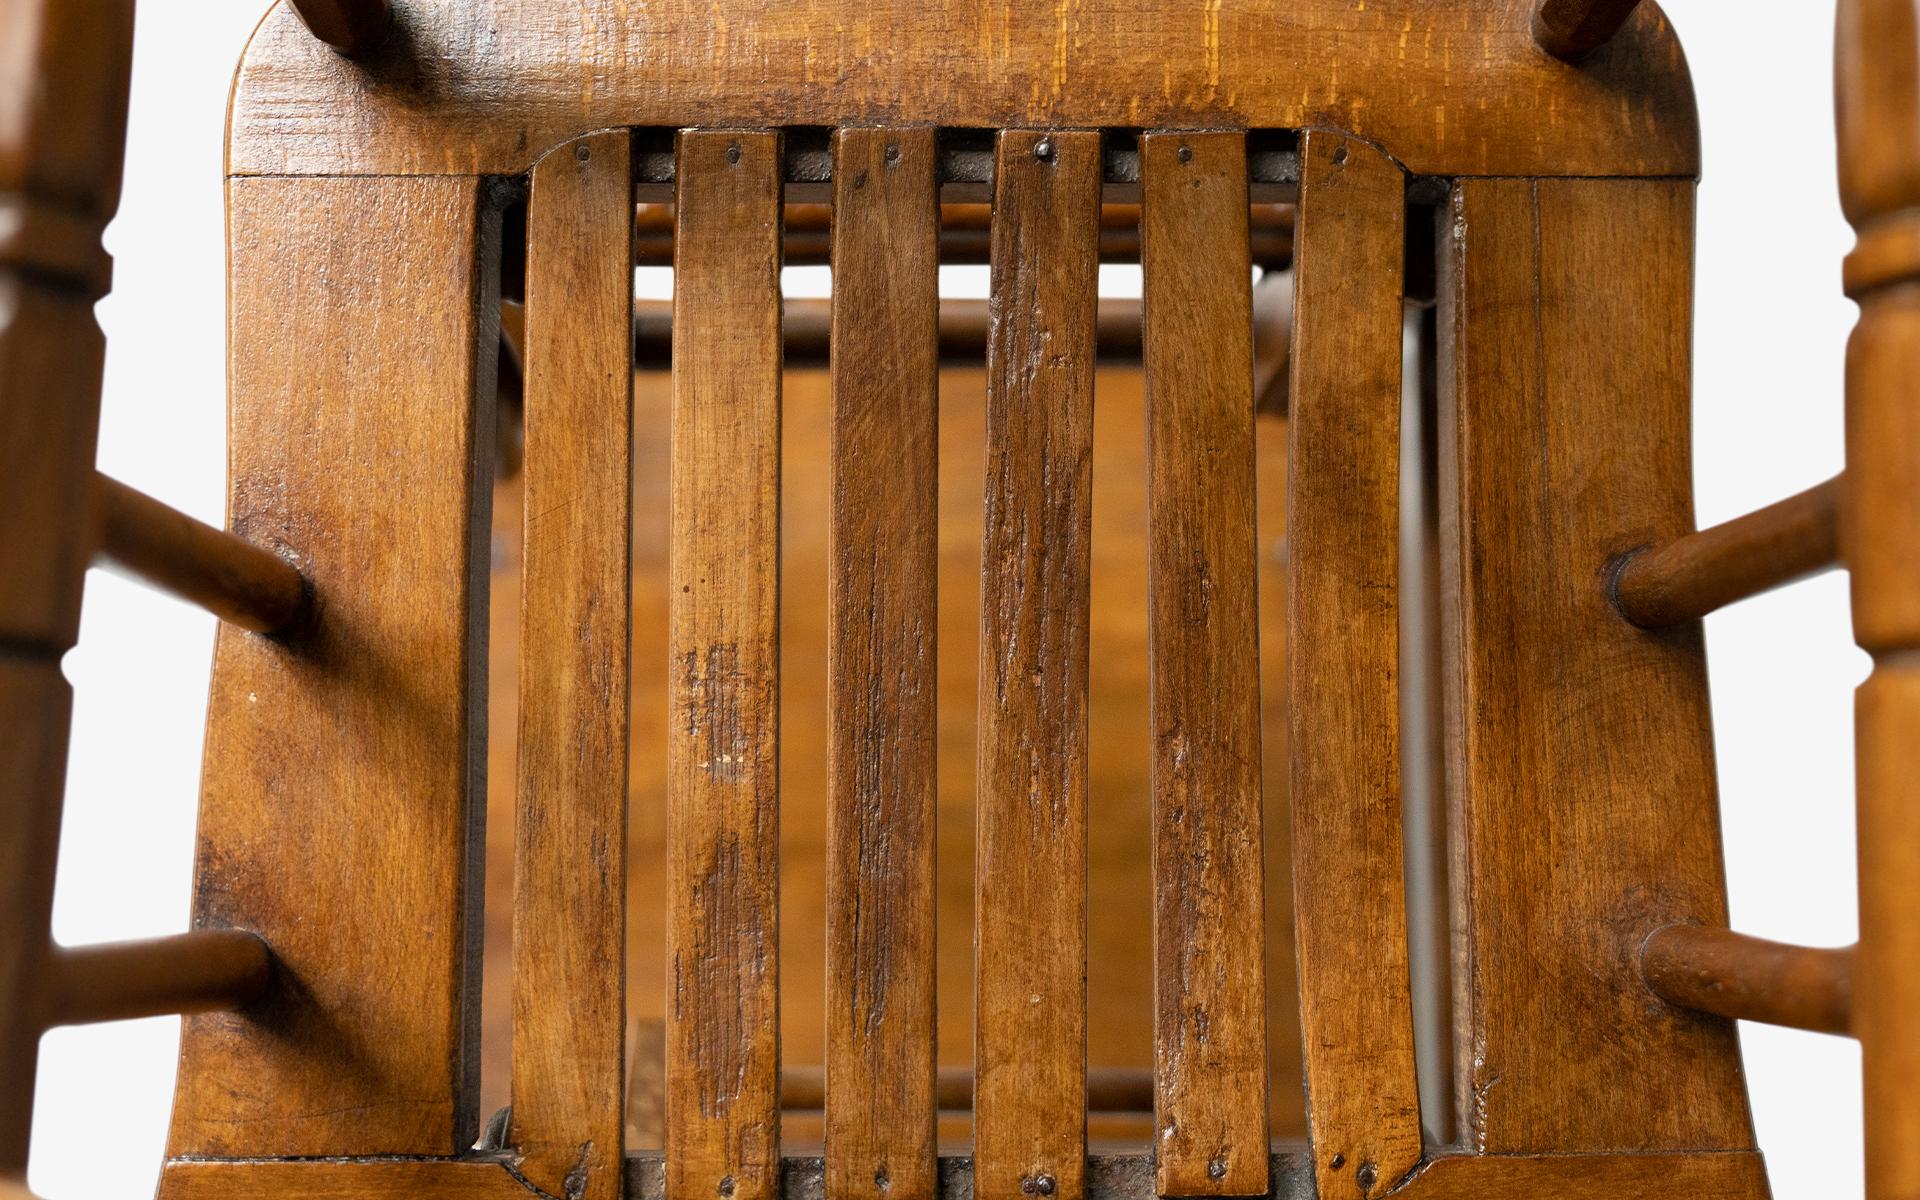 old wooden high chair